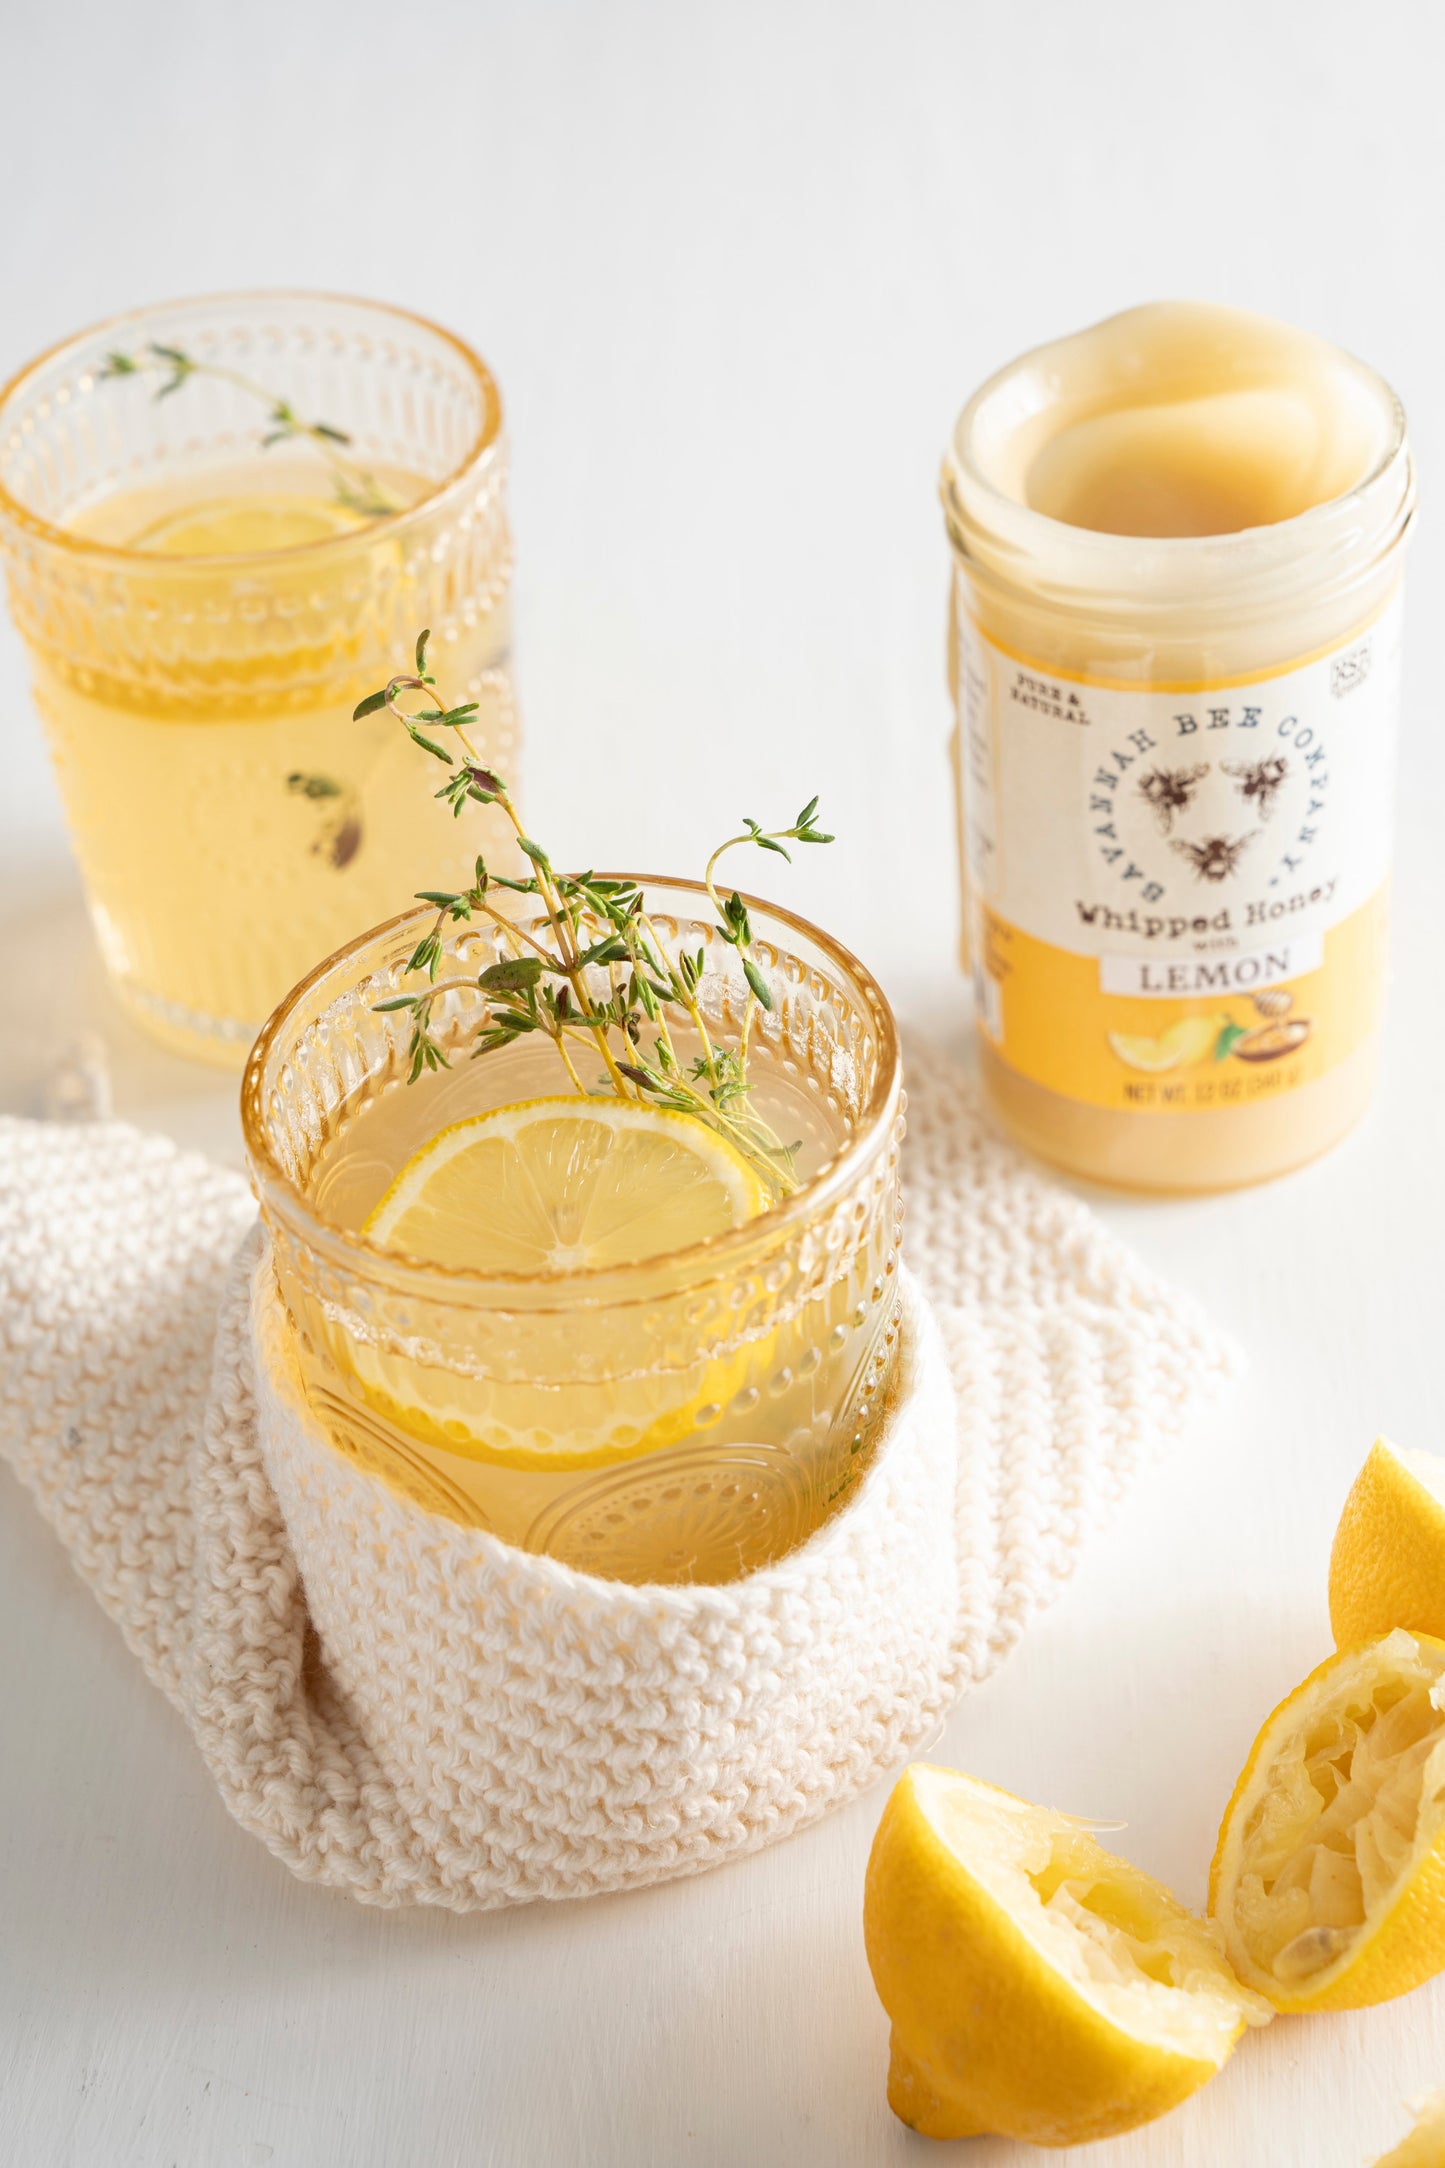 Two cups of hot toddies with lemon and whipped honey with lemon.